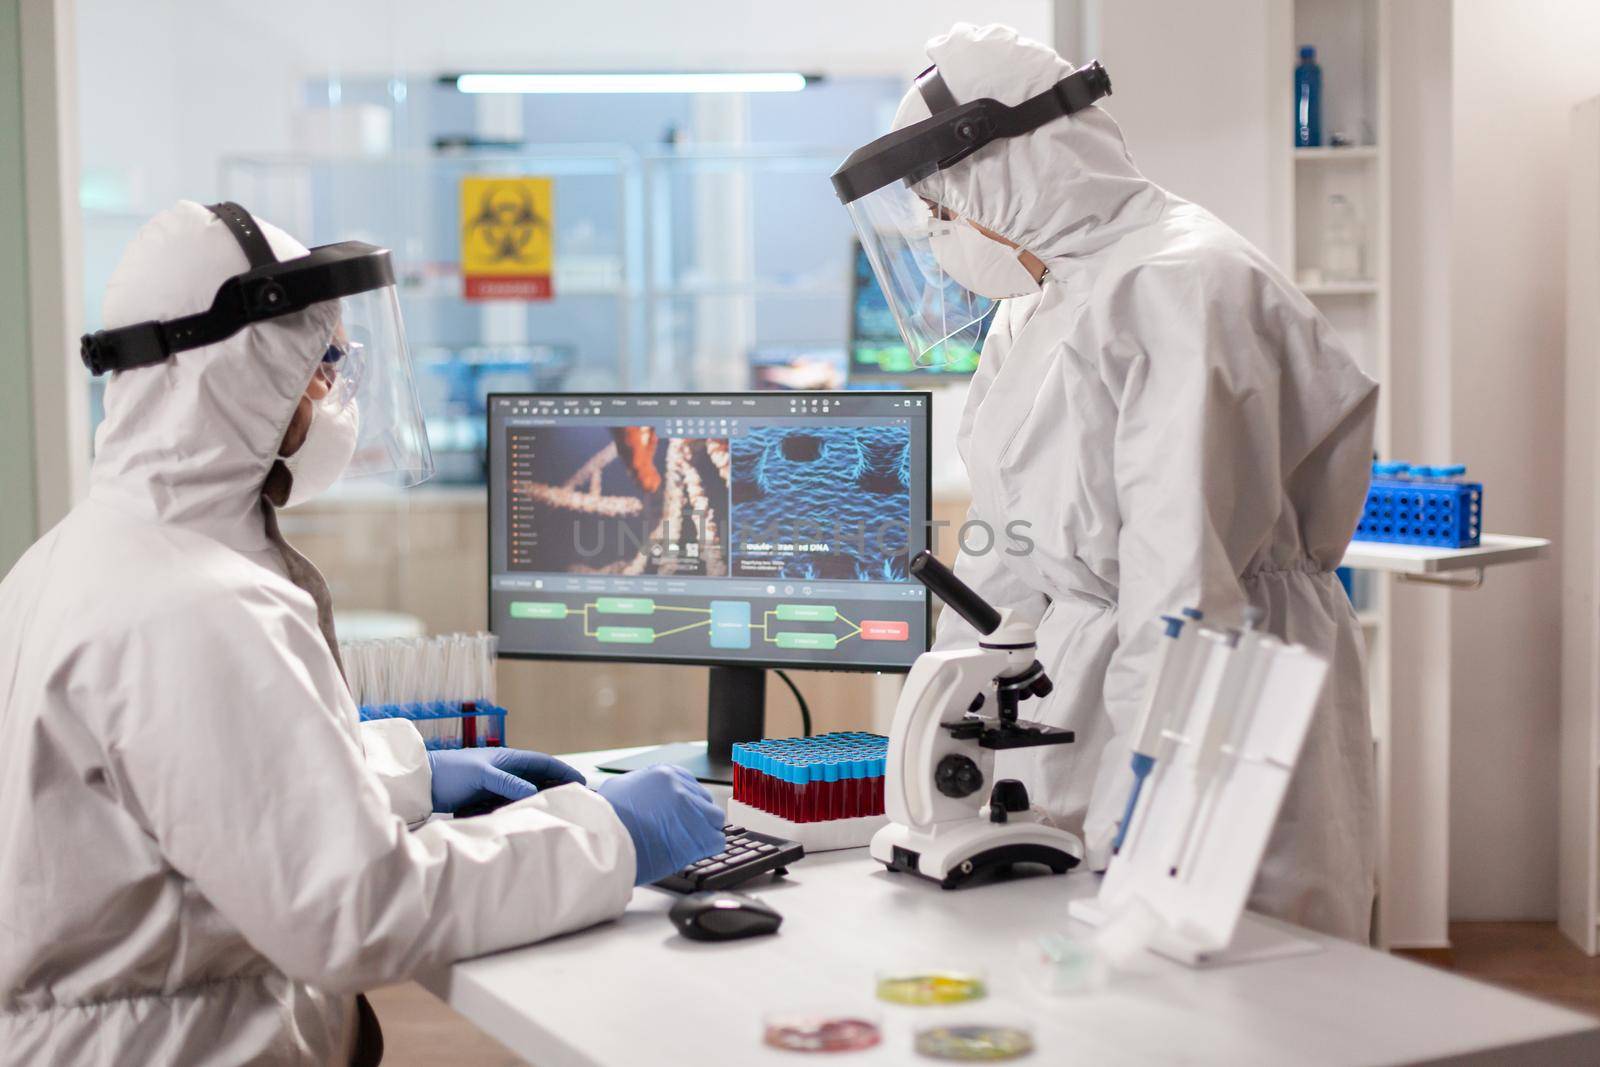 Scientists in protection suits analysing dna sample infected with virus by DCStudio